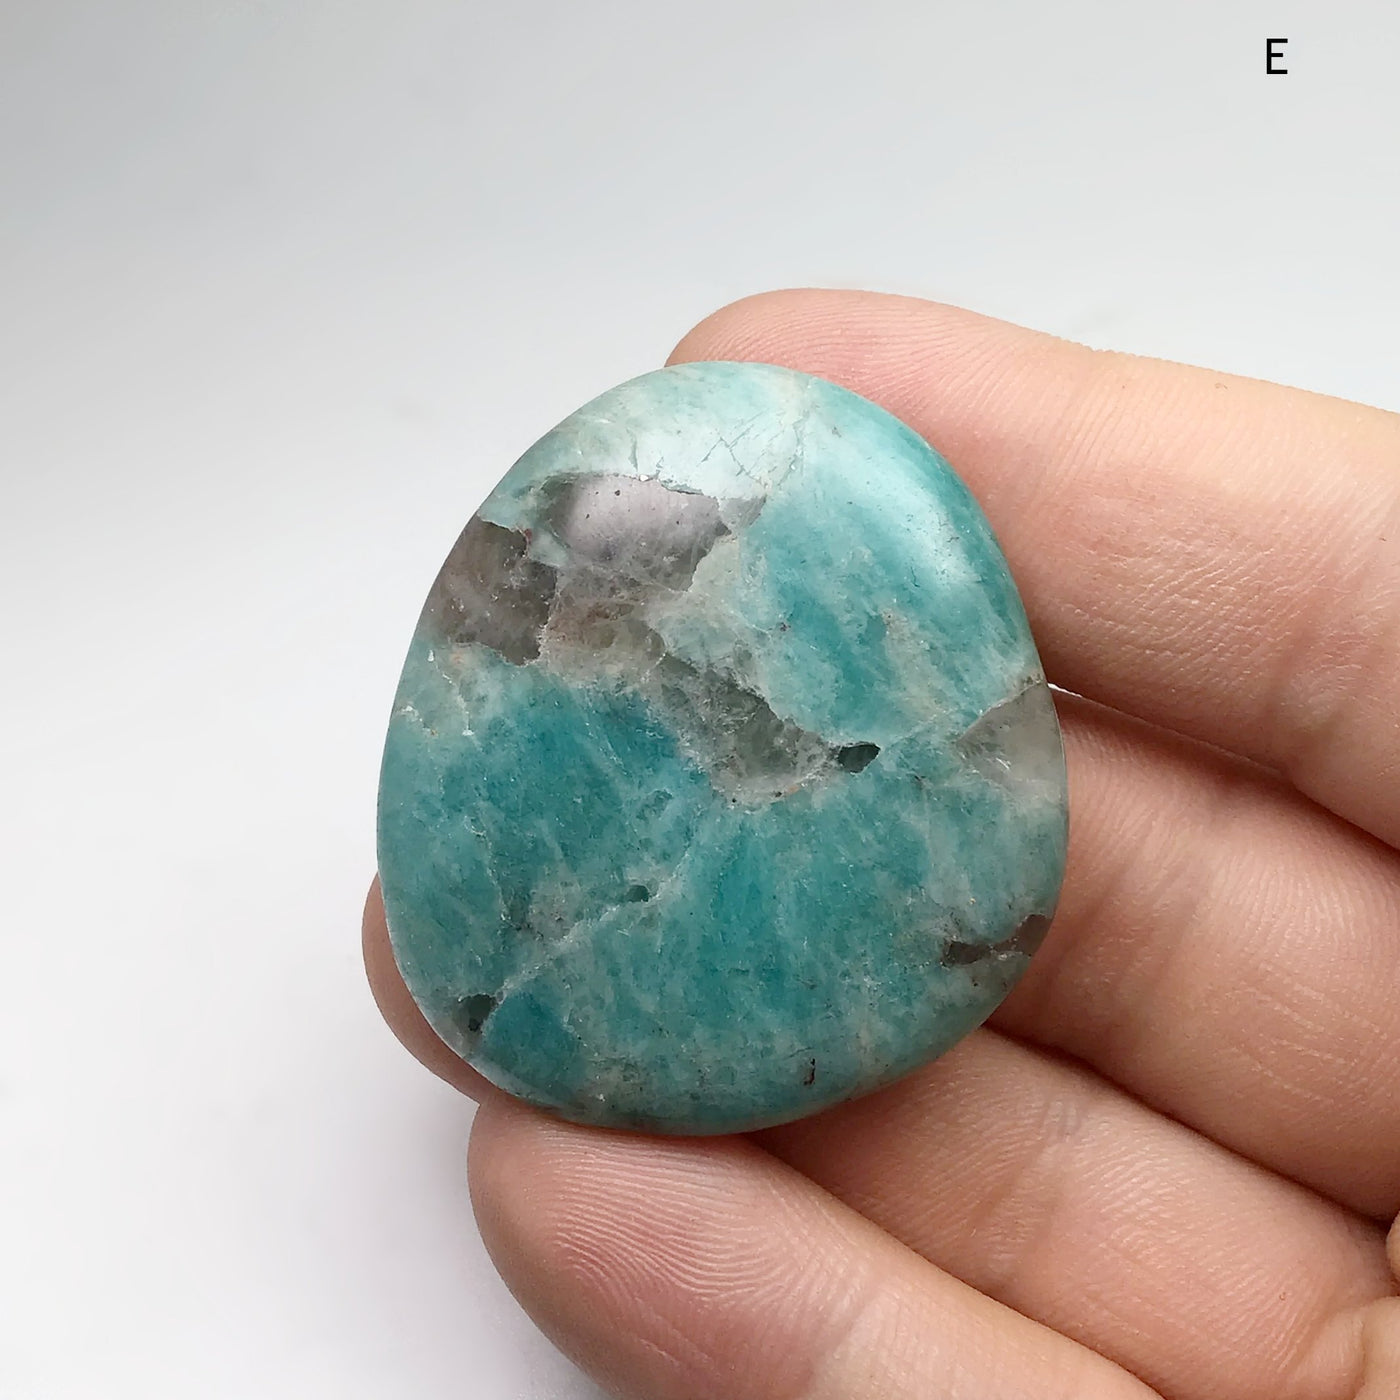 Amazonite Touch Stone at $25 Each